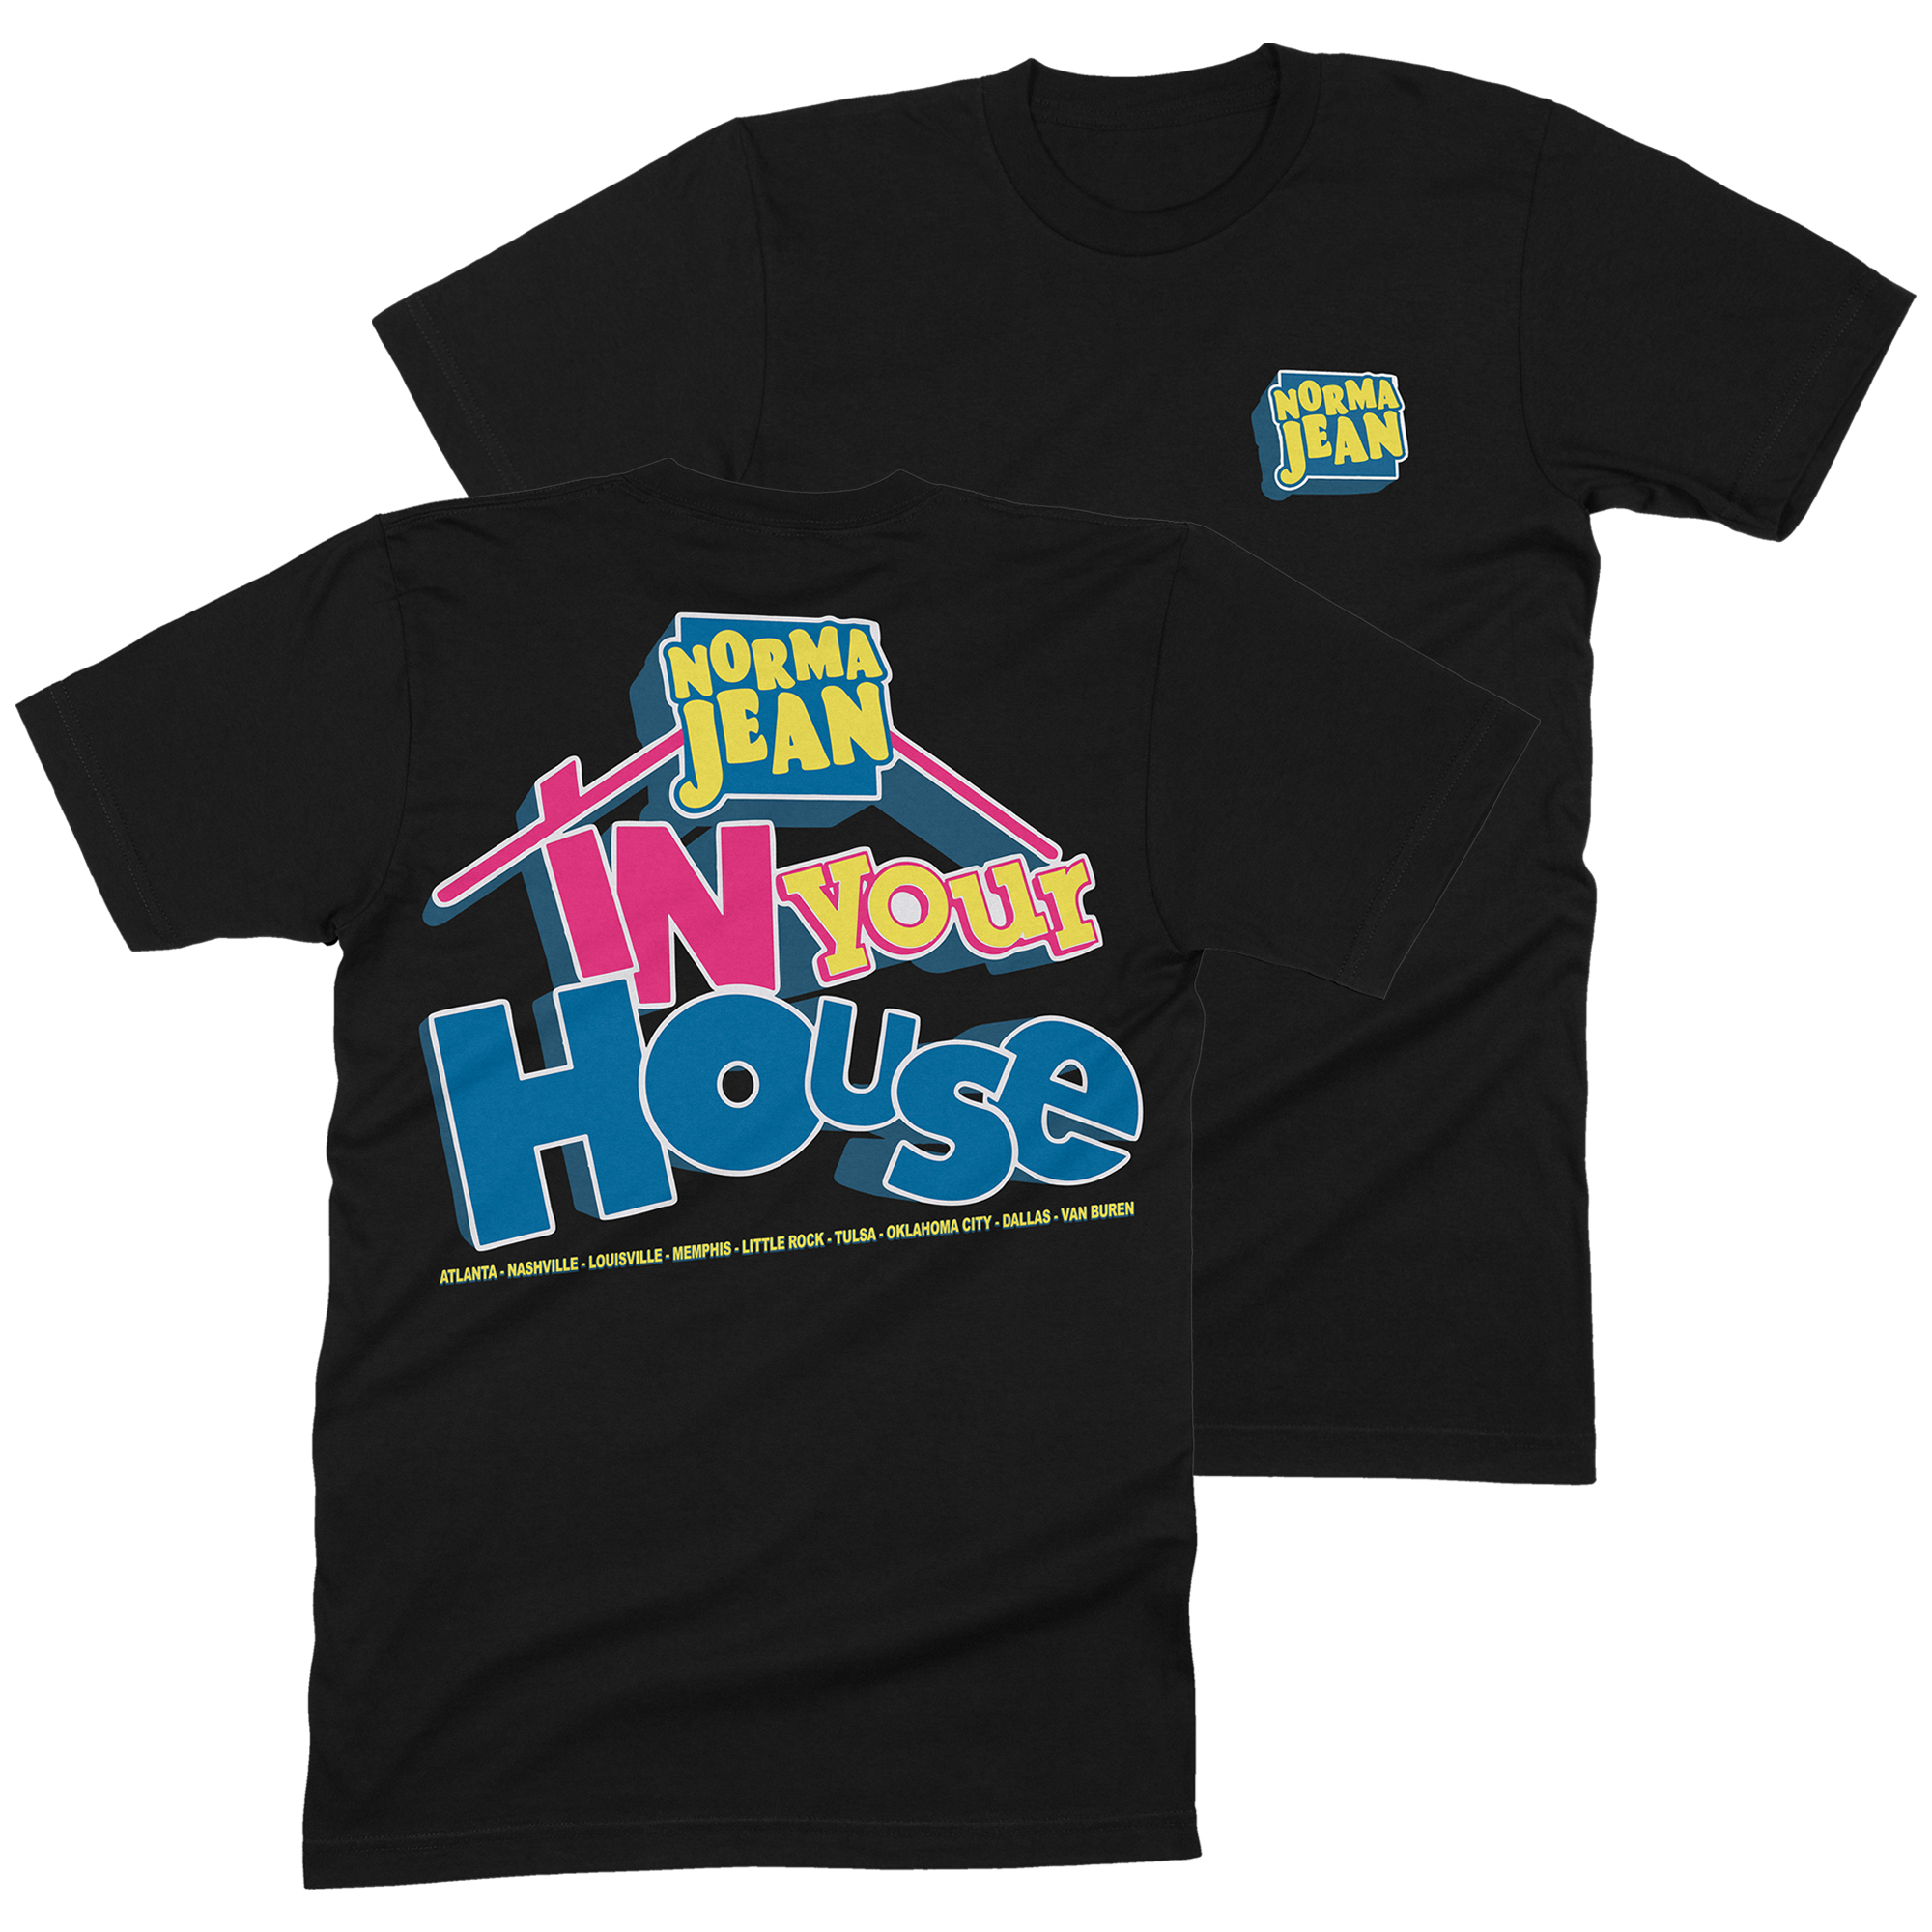 Norma Jean - In Your House Shirt